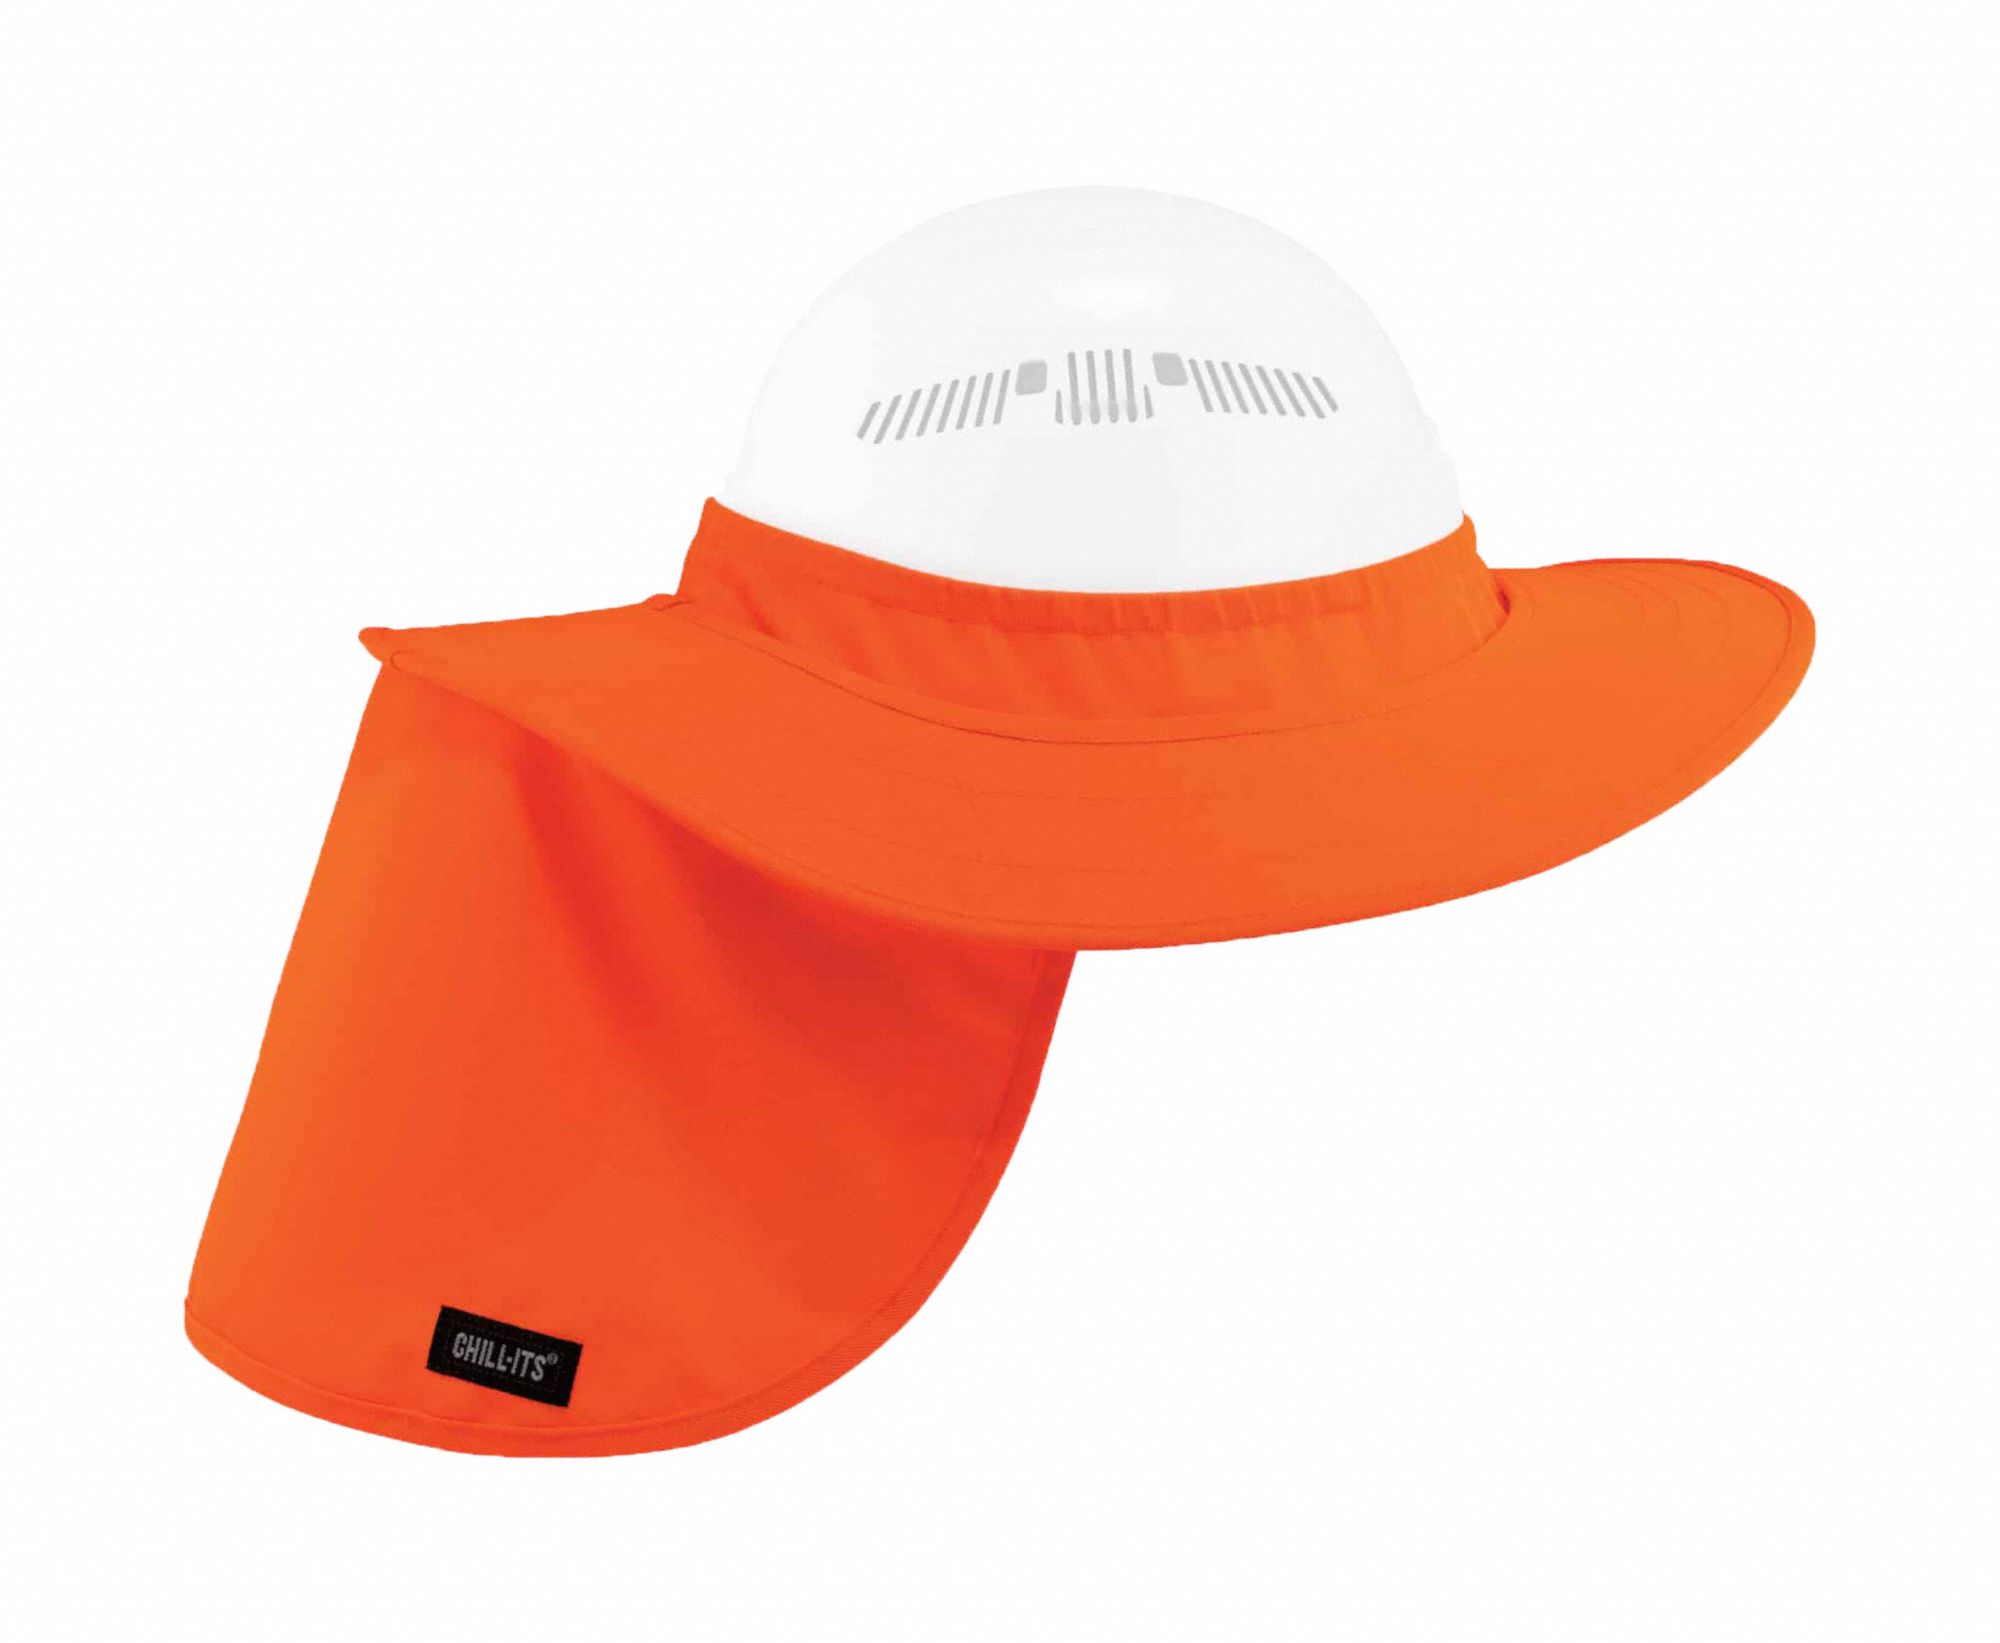 CHILL-ITS BY ERGODYNE Visor with Neck Shade: Orange, Polyester,  Over-the-Hat with Wide Brim